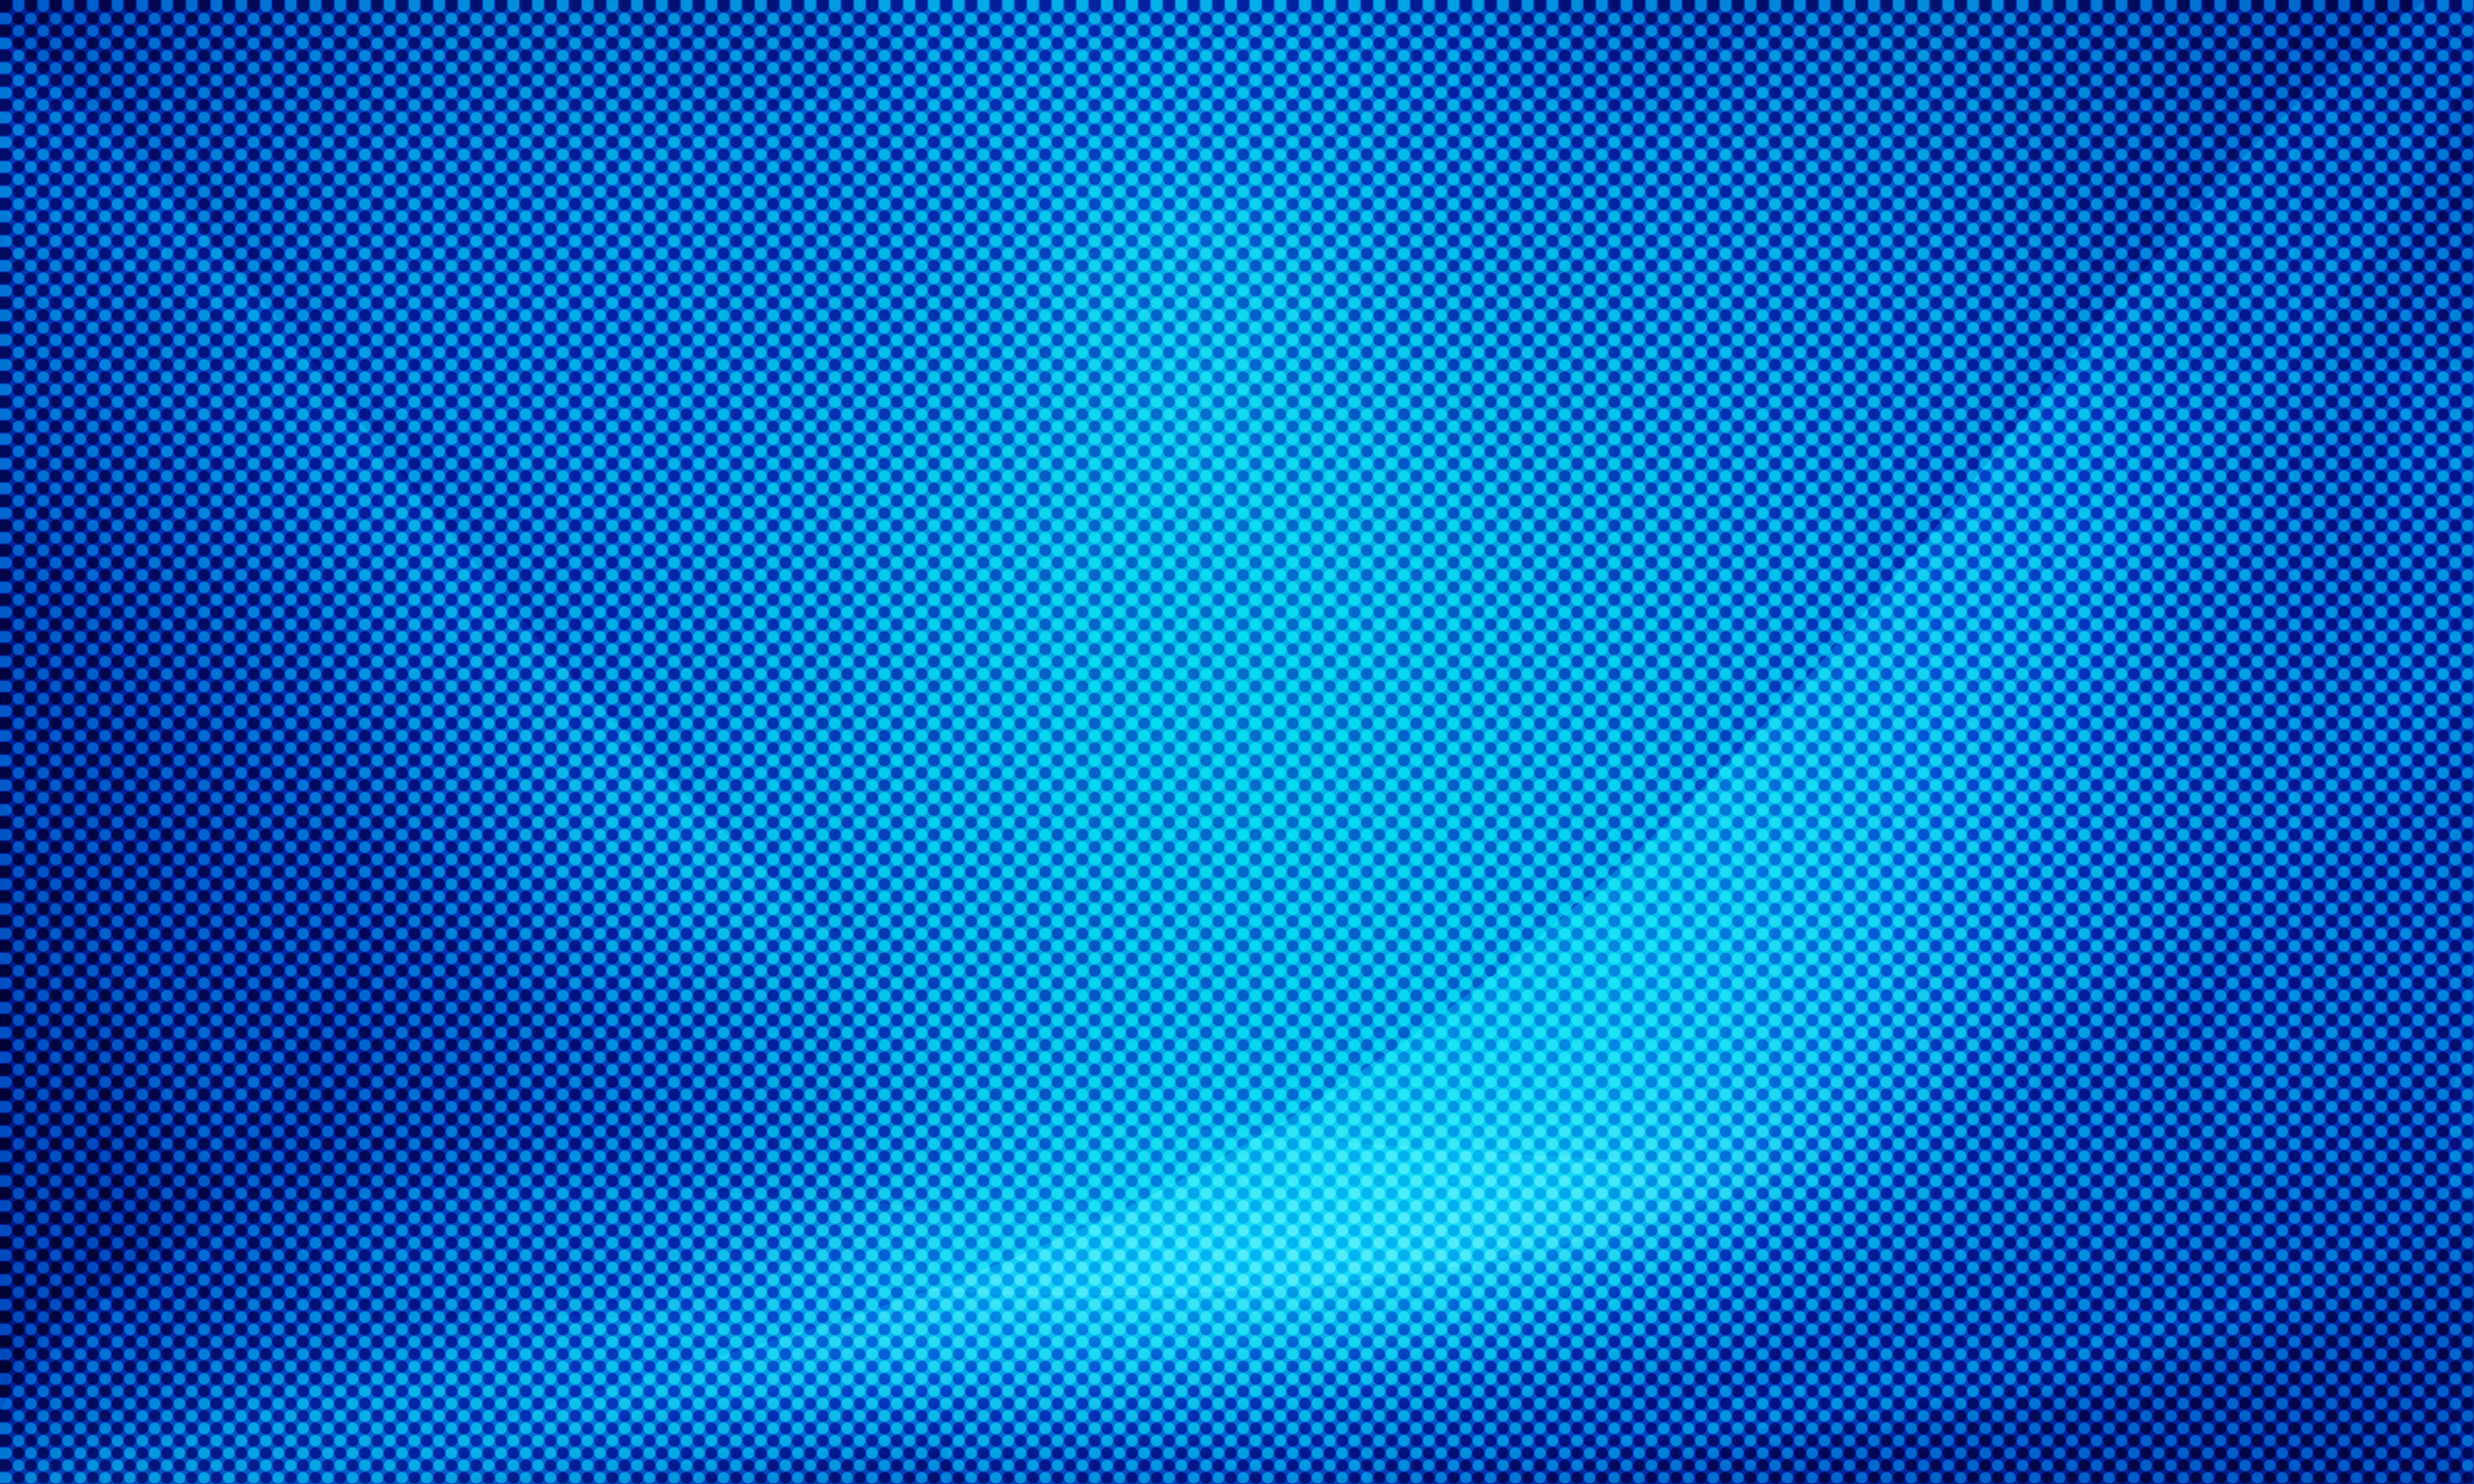 abstract blue background image